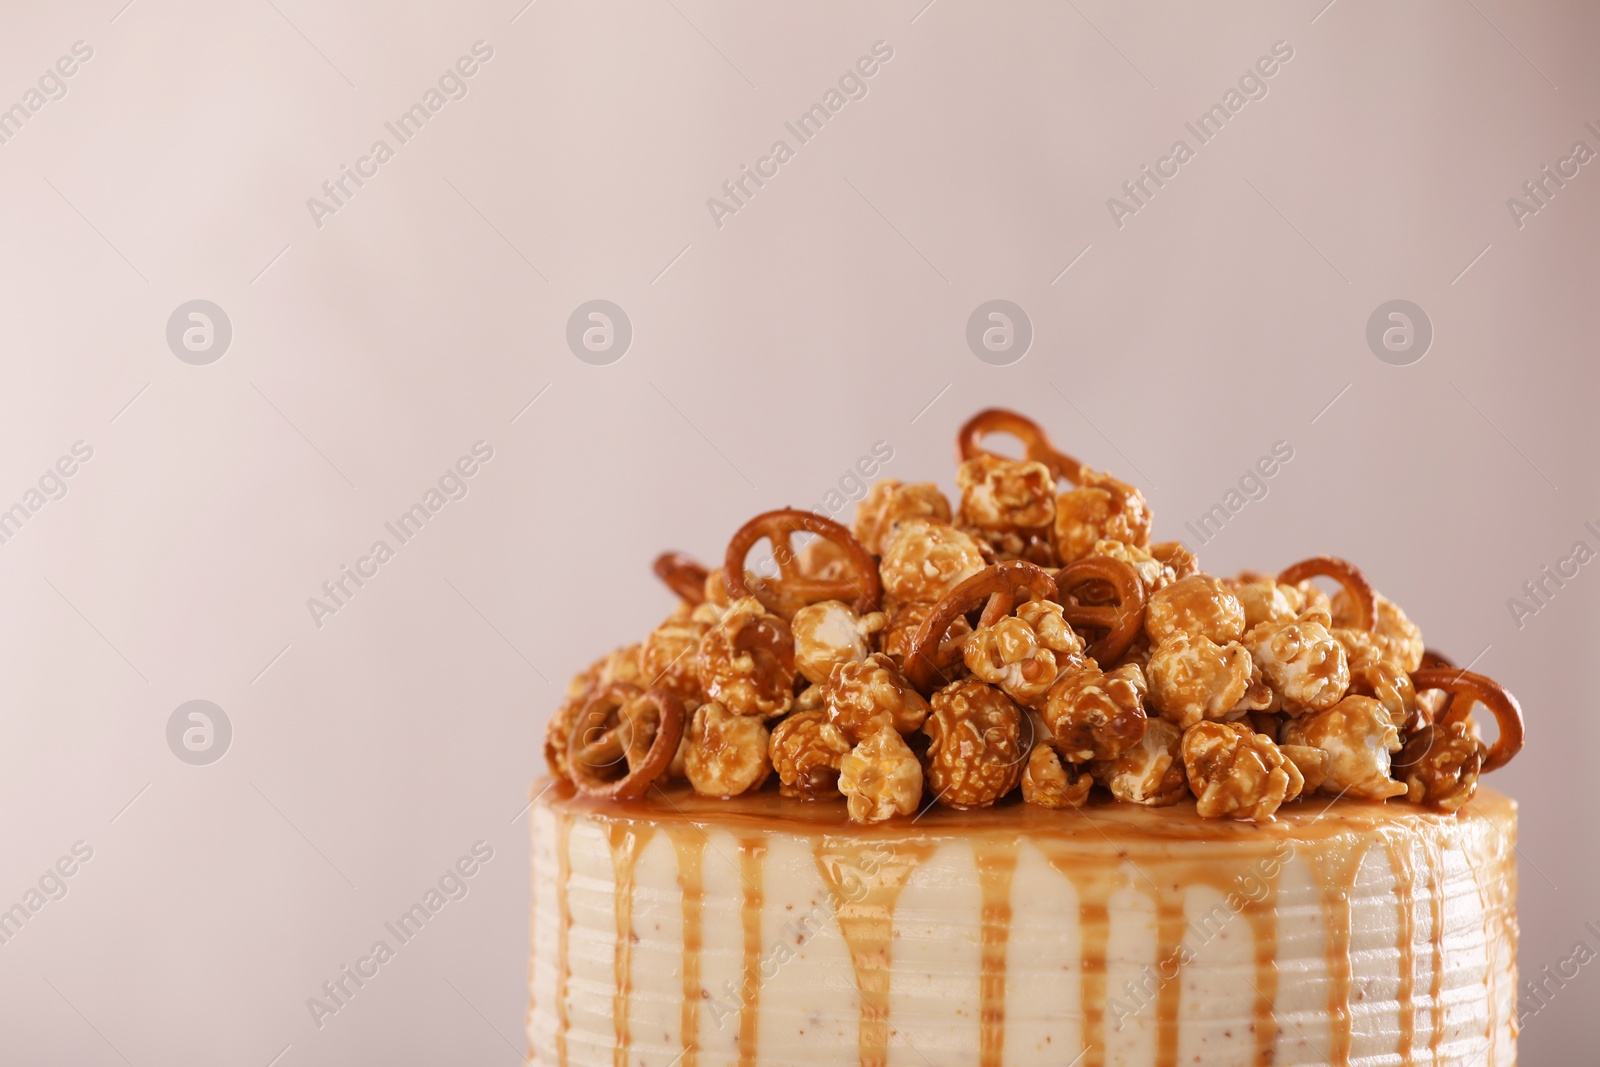 Photo of Caramel drip cake decorated with popcorn and pretzels against light background, closeup. Space for text